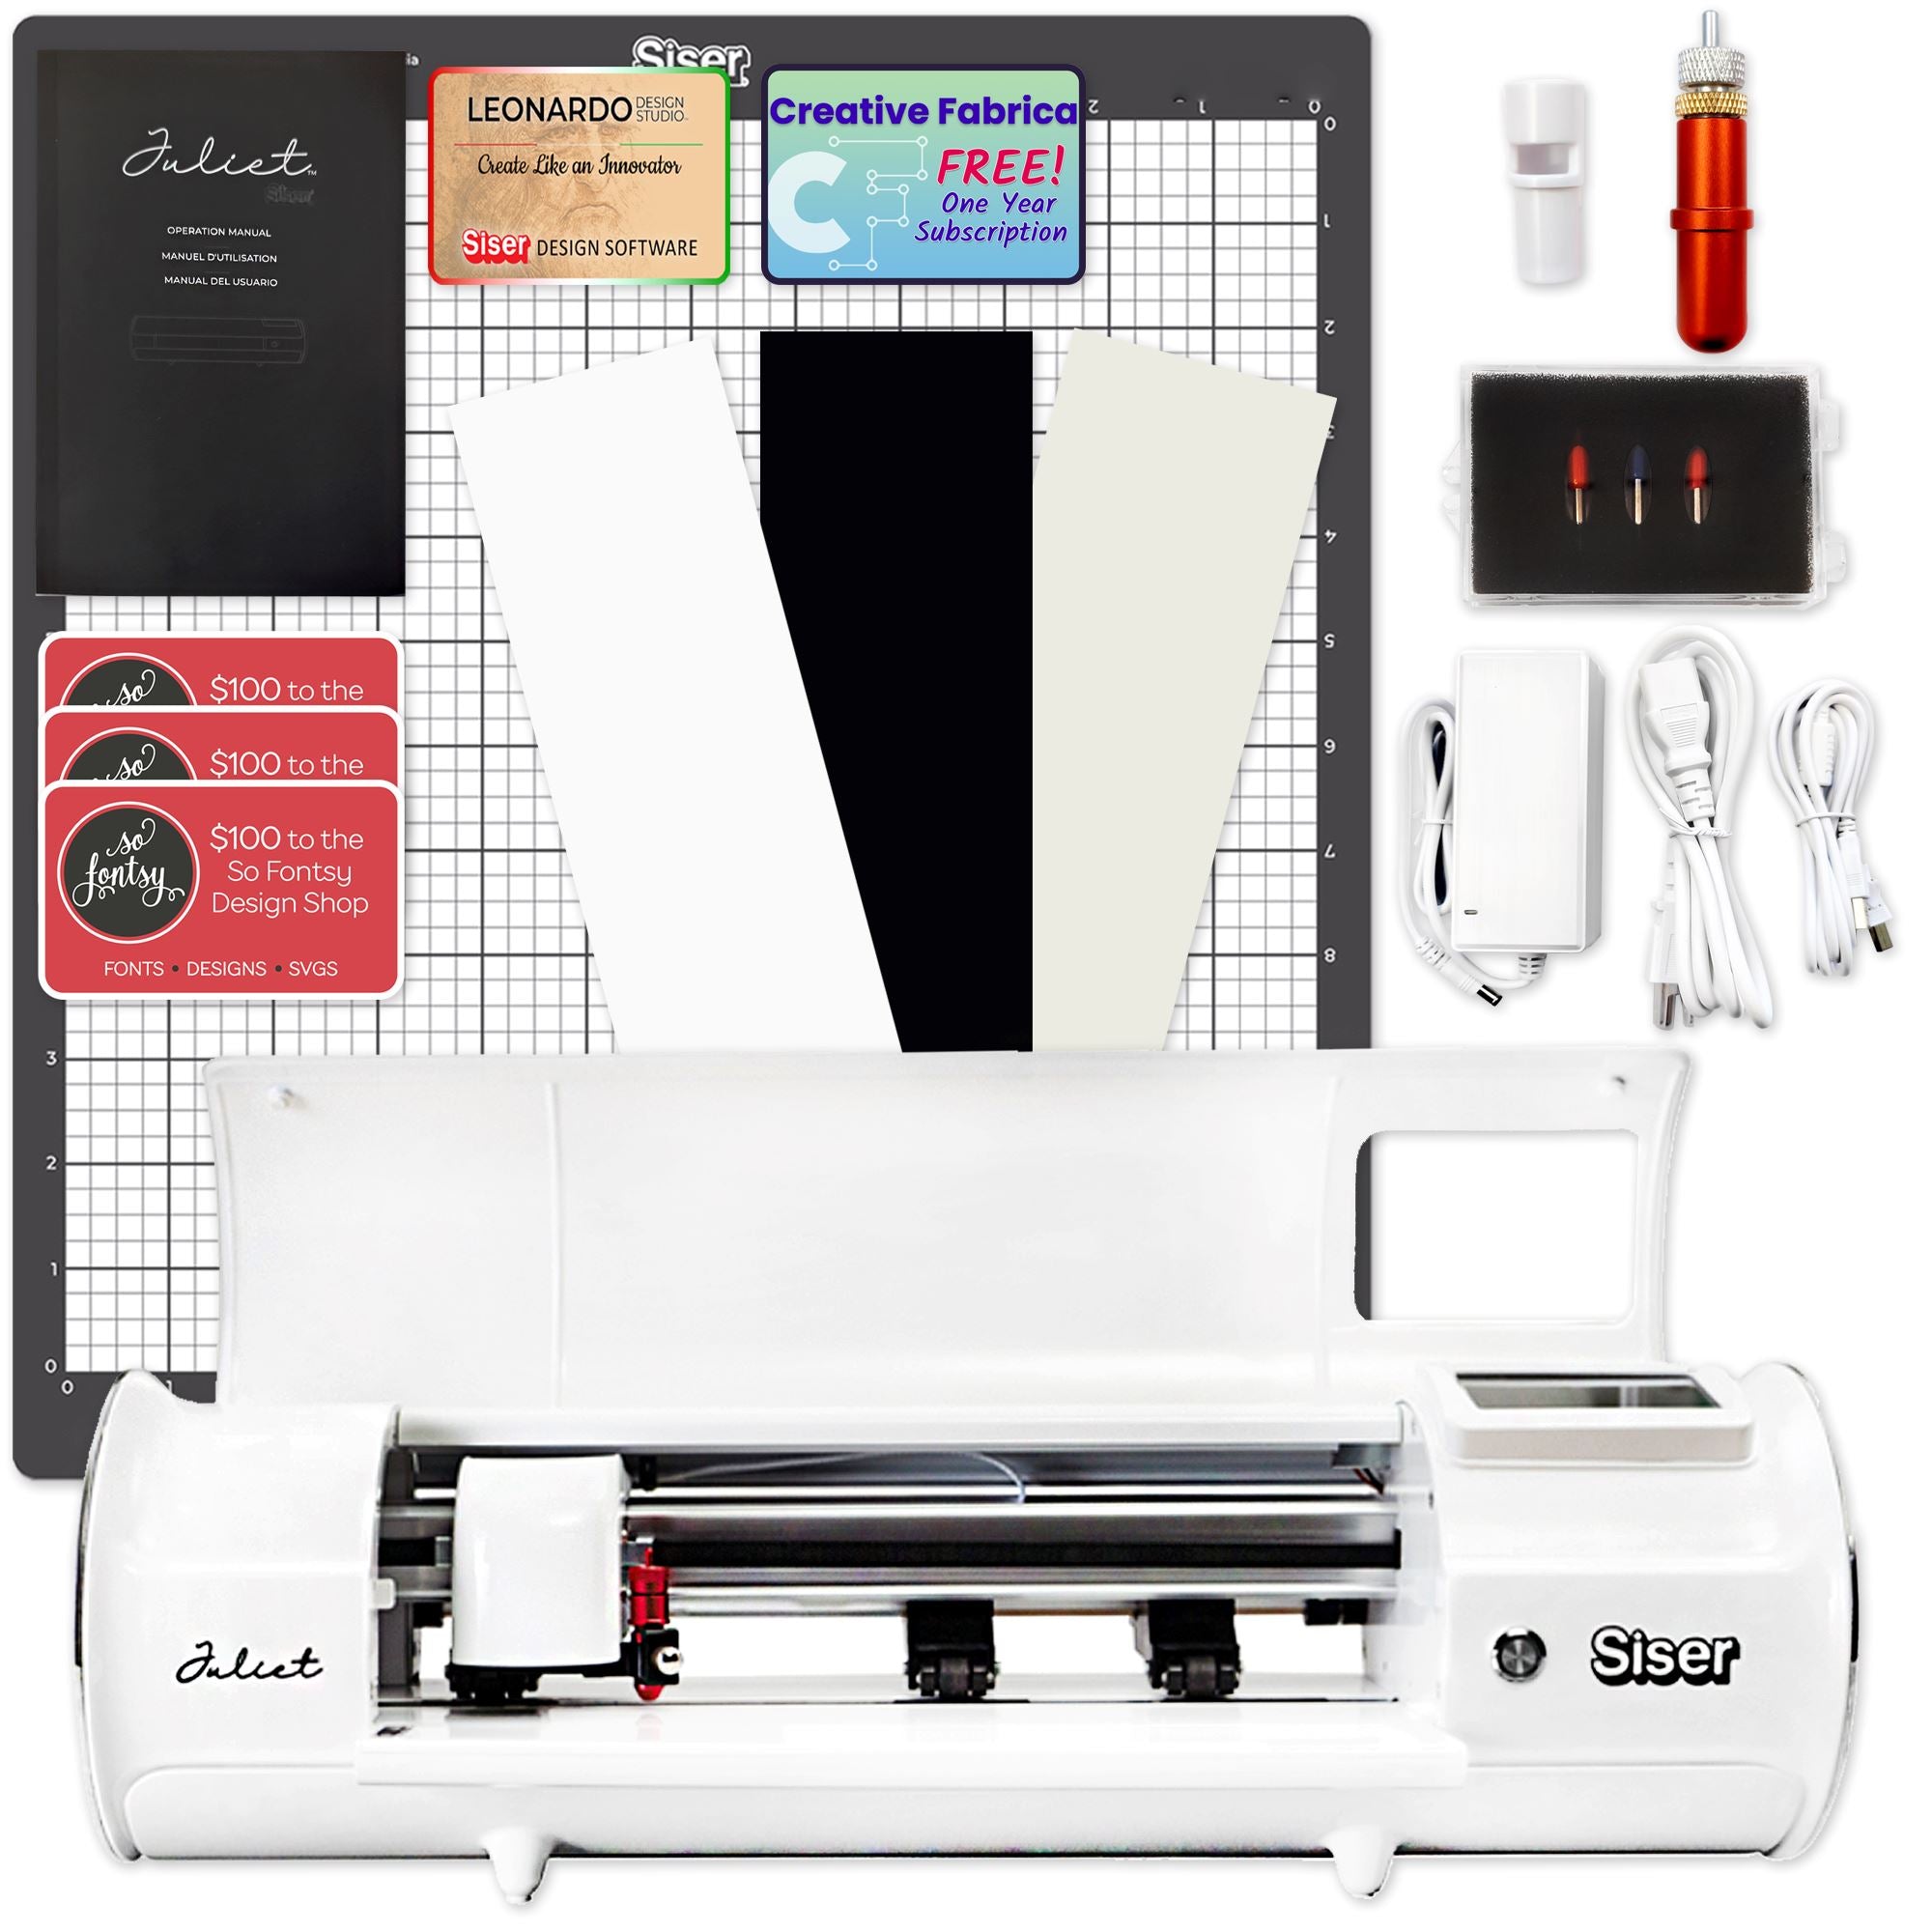  8-Pack Replacement For Cricut Maker VERSION 2 & 3 ONLY